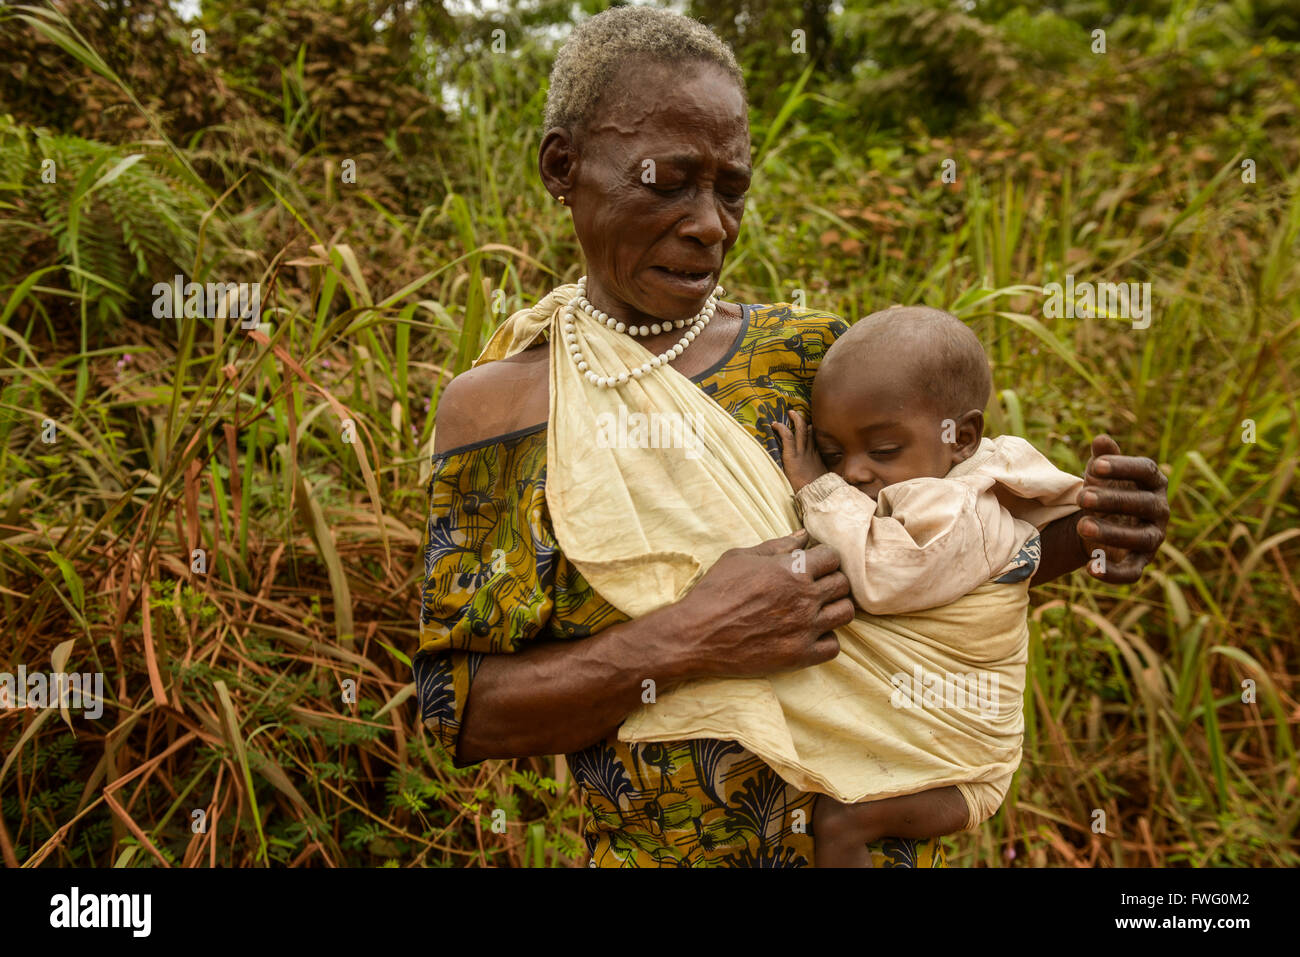 Older woman with baby, Gabon, Central Africa Stock Photo